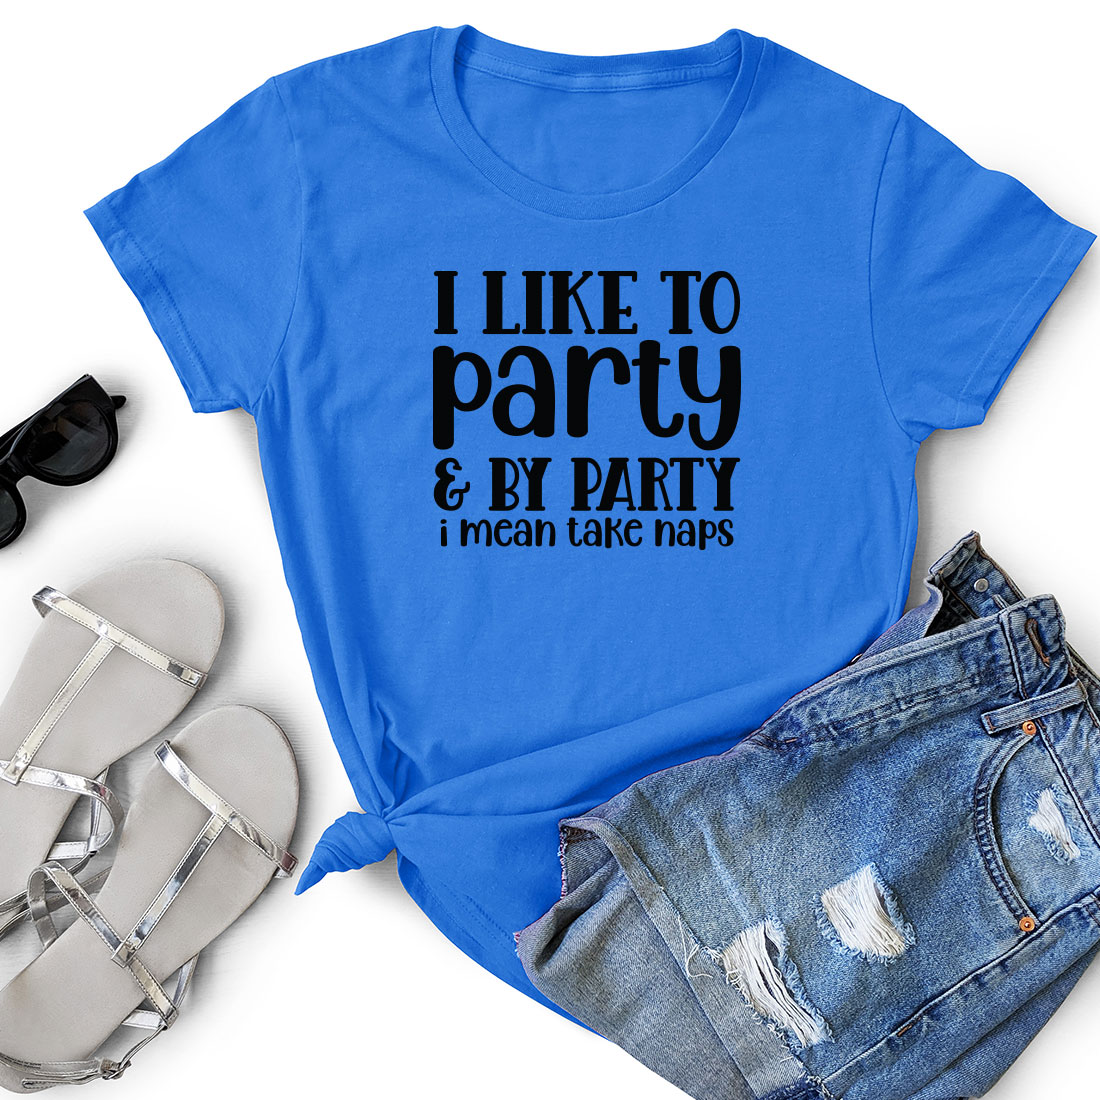 T - shirt that says i like to party and by party.